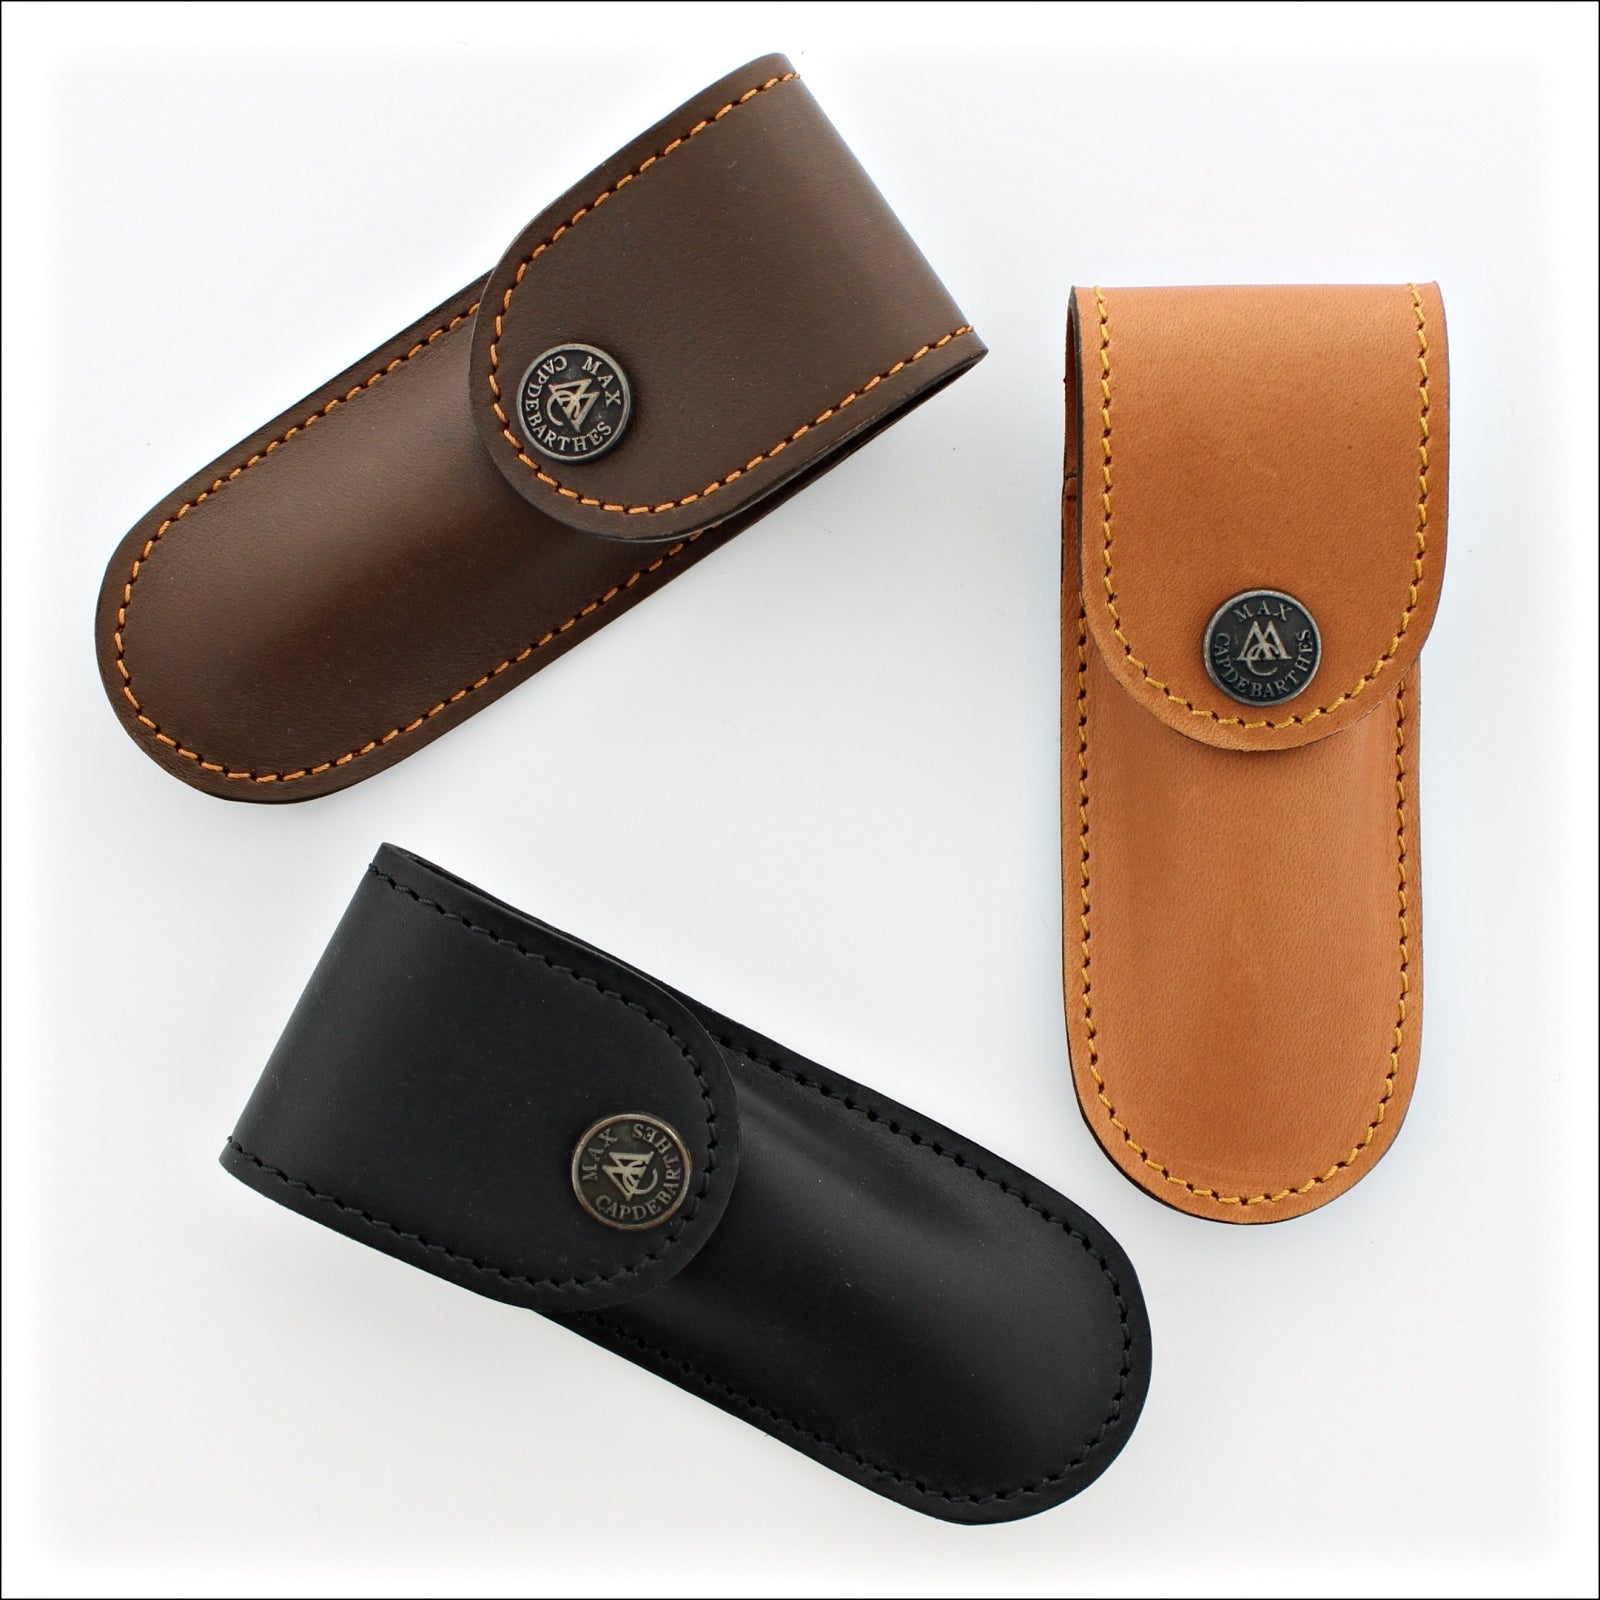 S100 Leather Sheath for 9 to 13 cm Knives